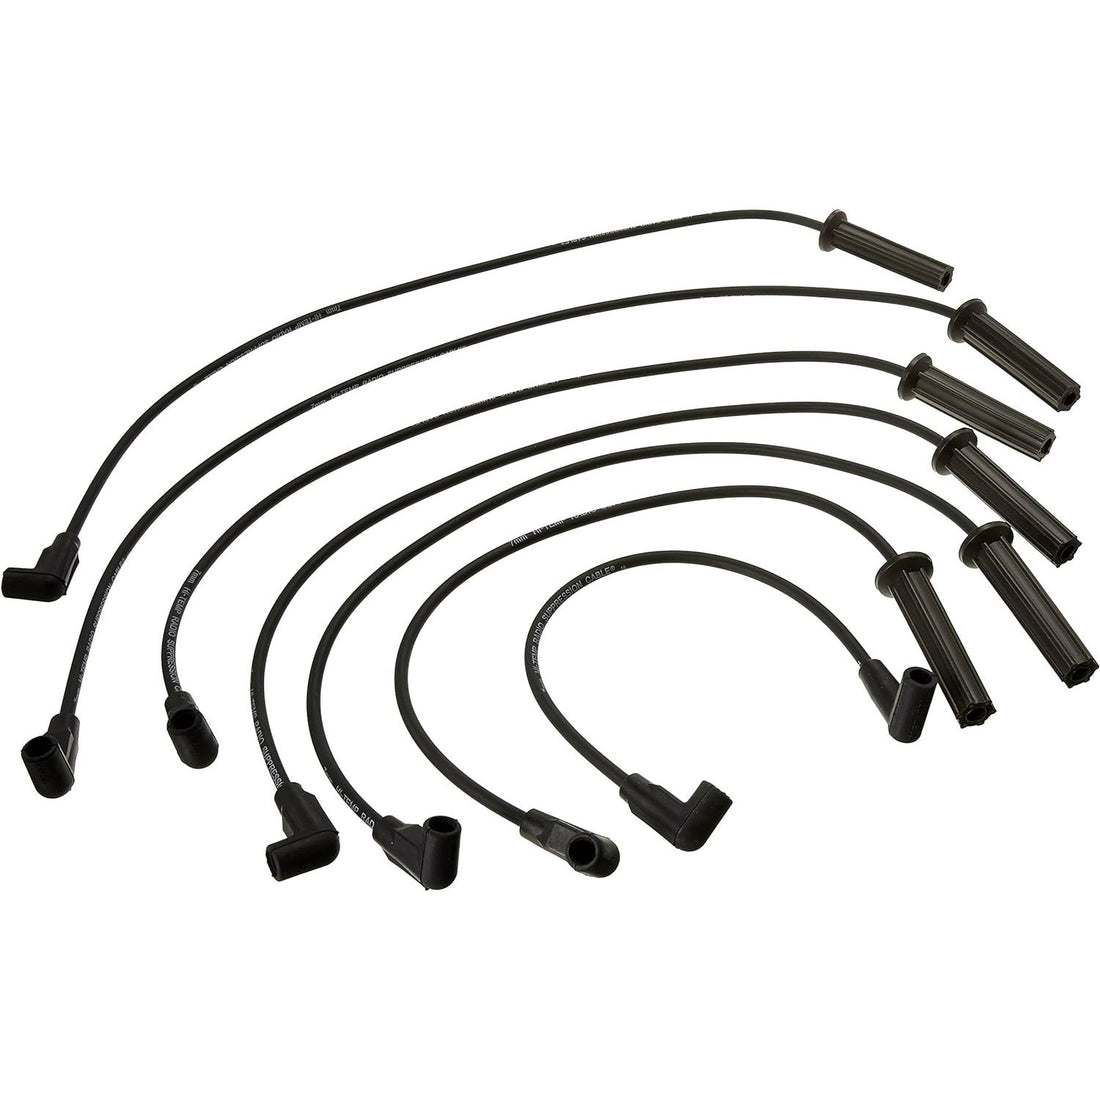 Standard Motor Products 27667 Pro Series Ignition Wire Set